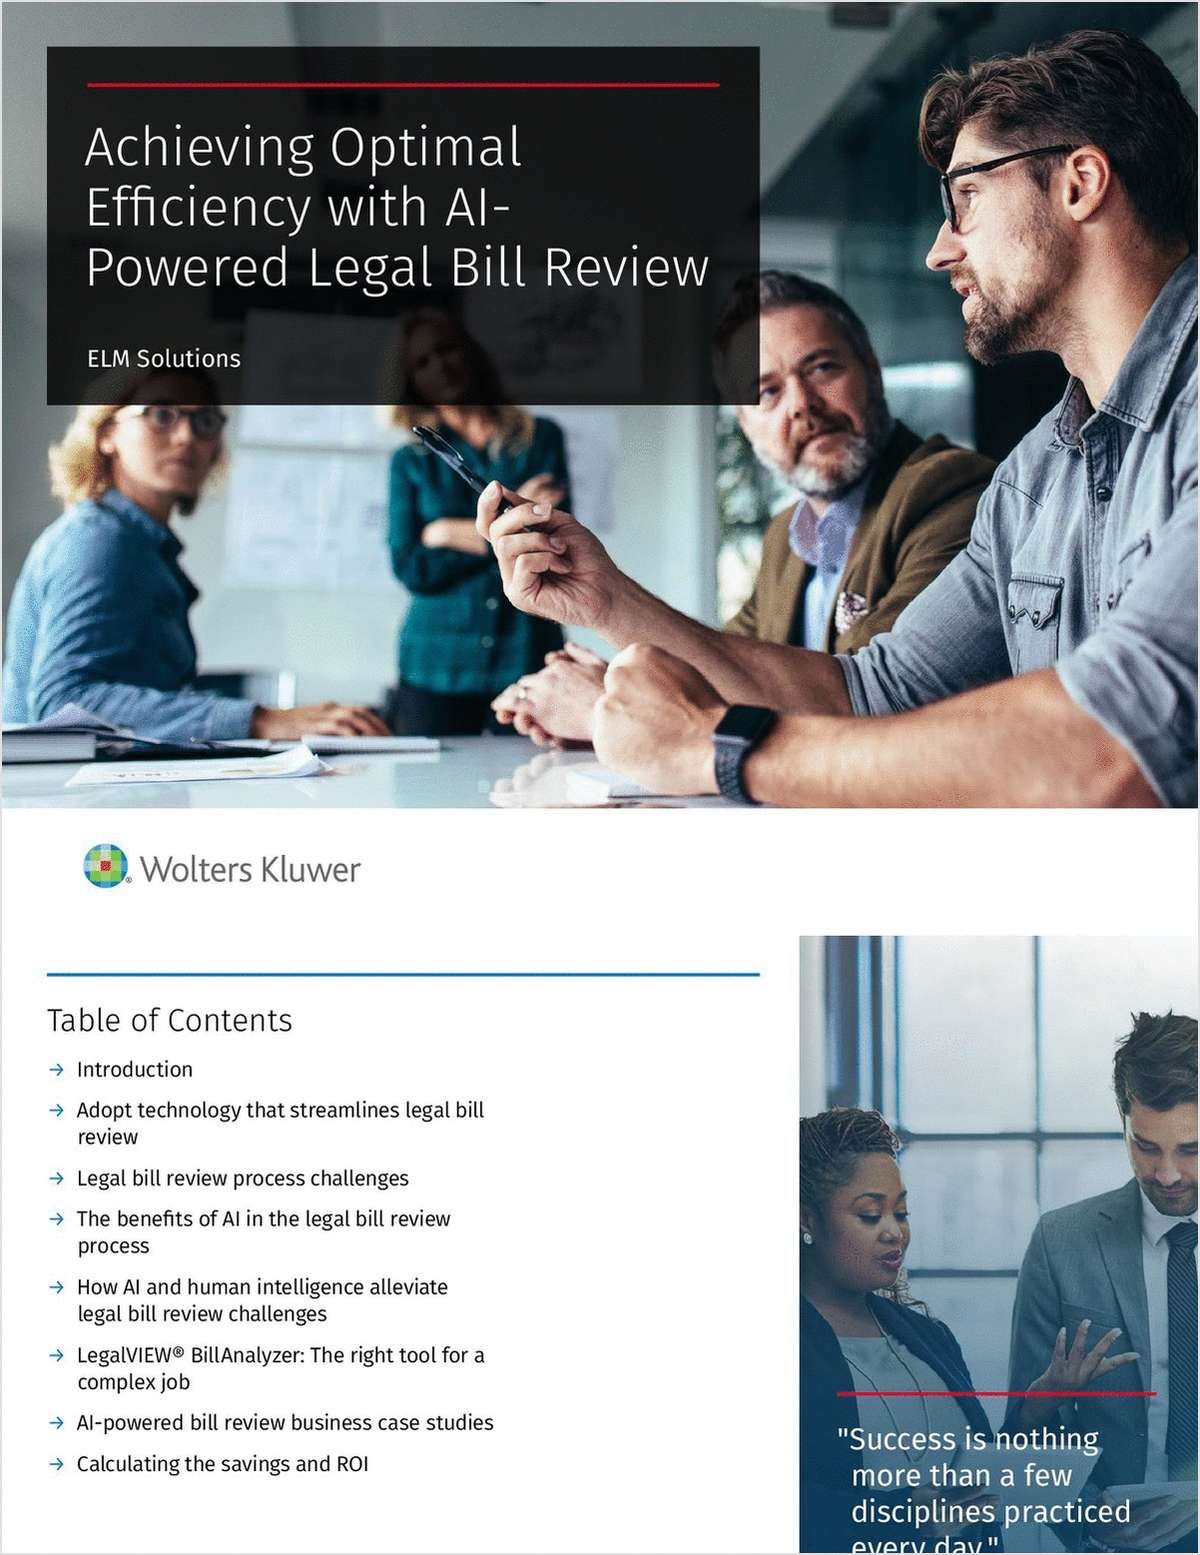 Achieving Optimal Efficiency with AI-Powered Legal Bill Review